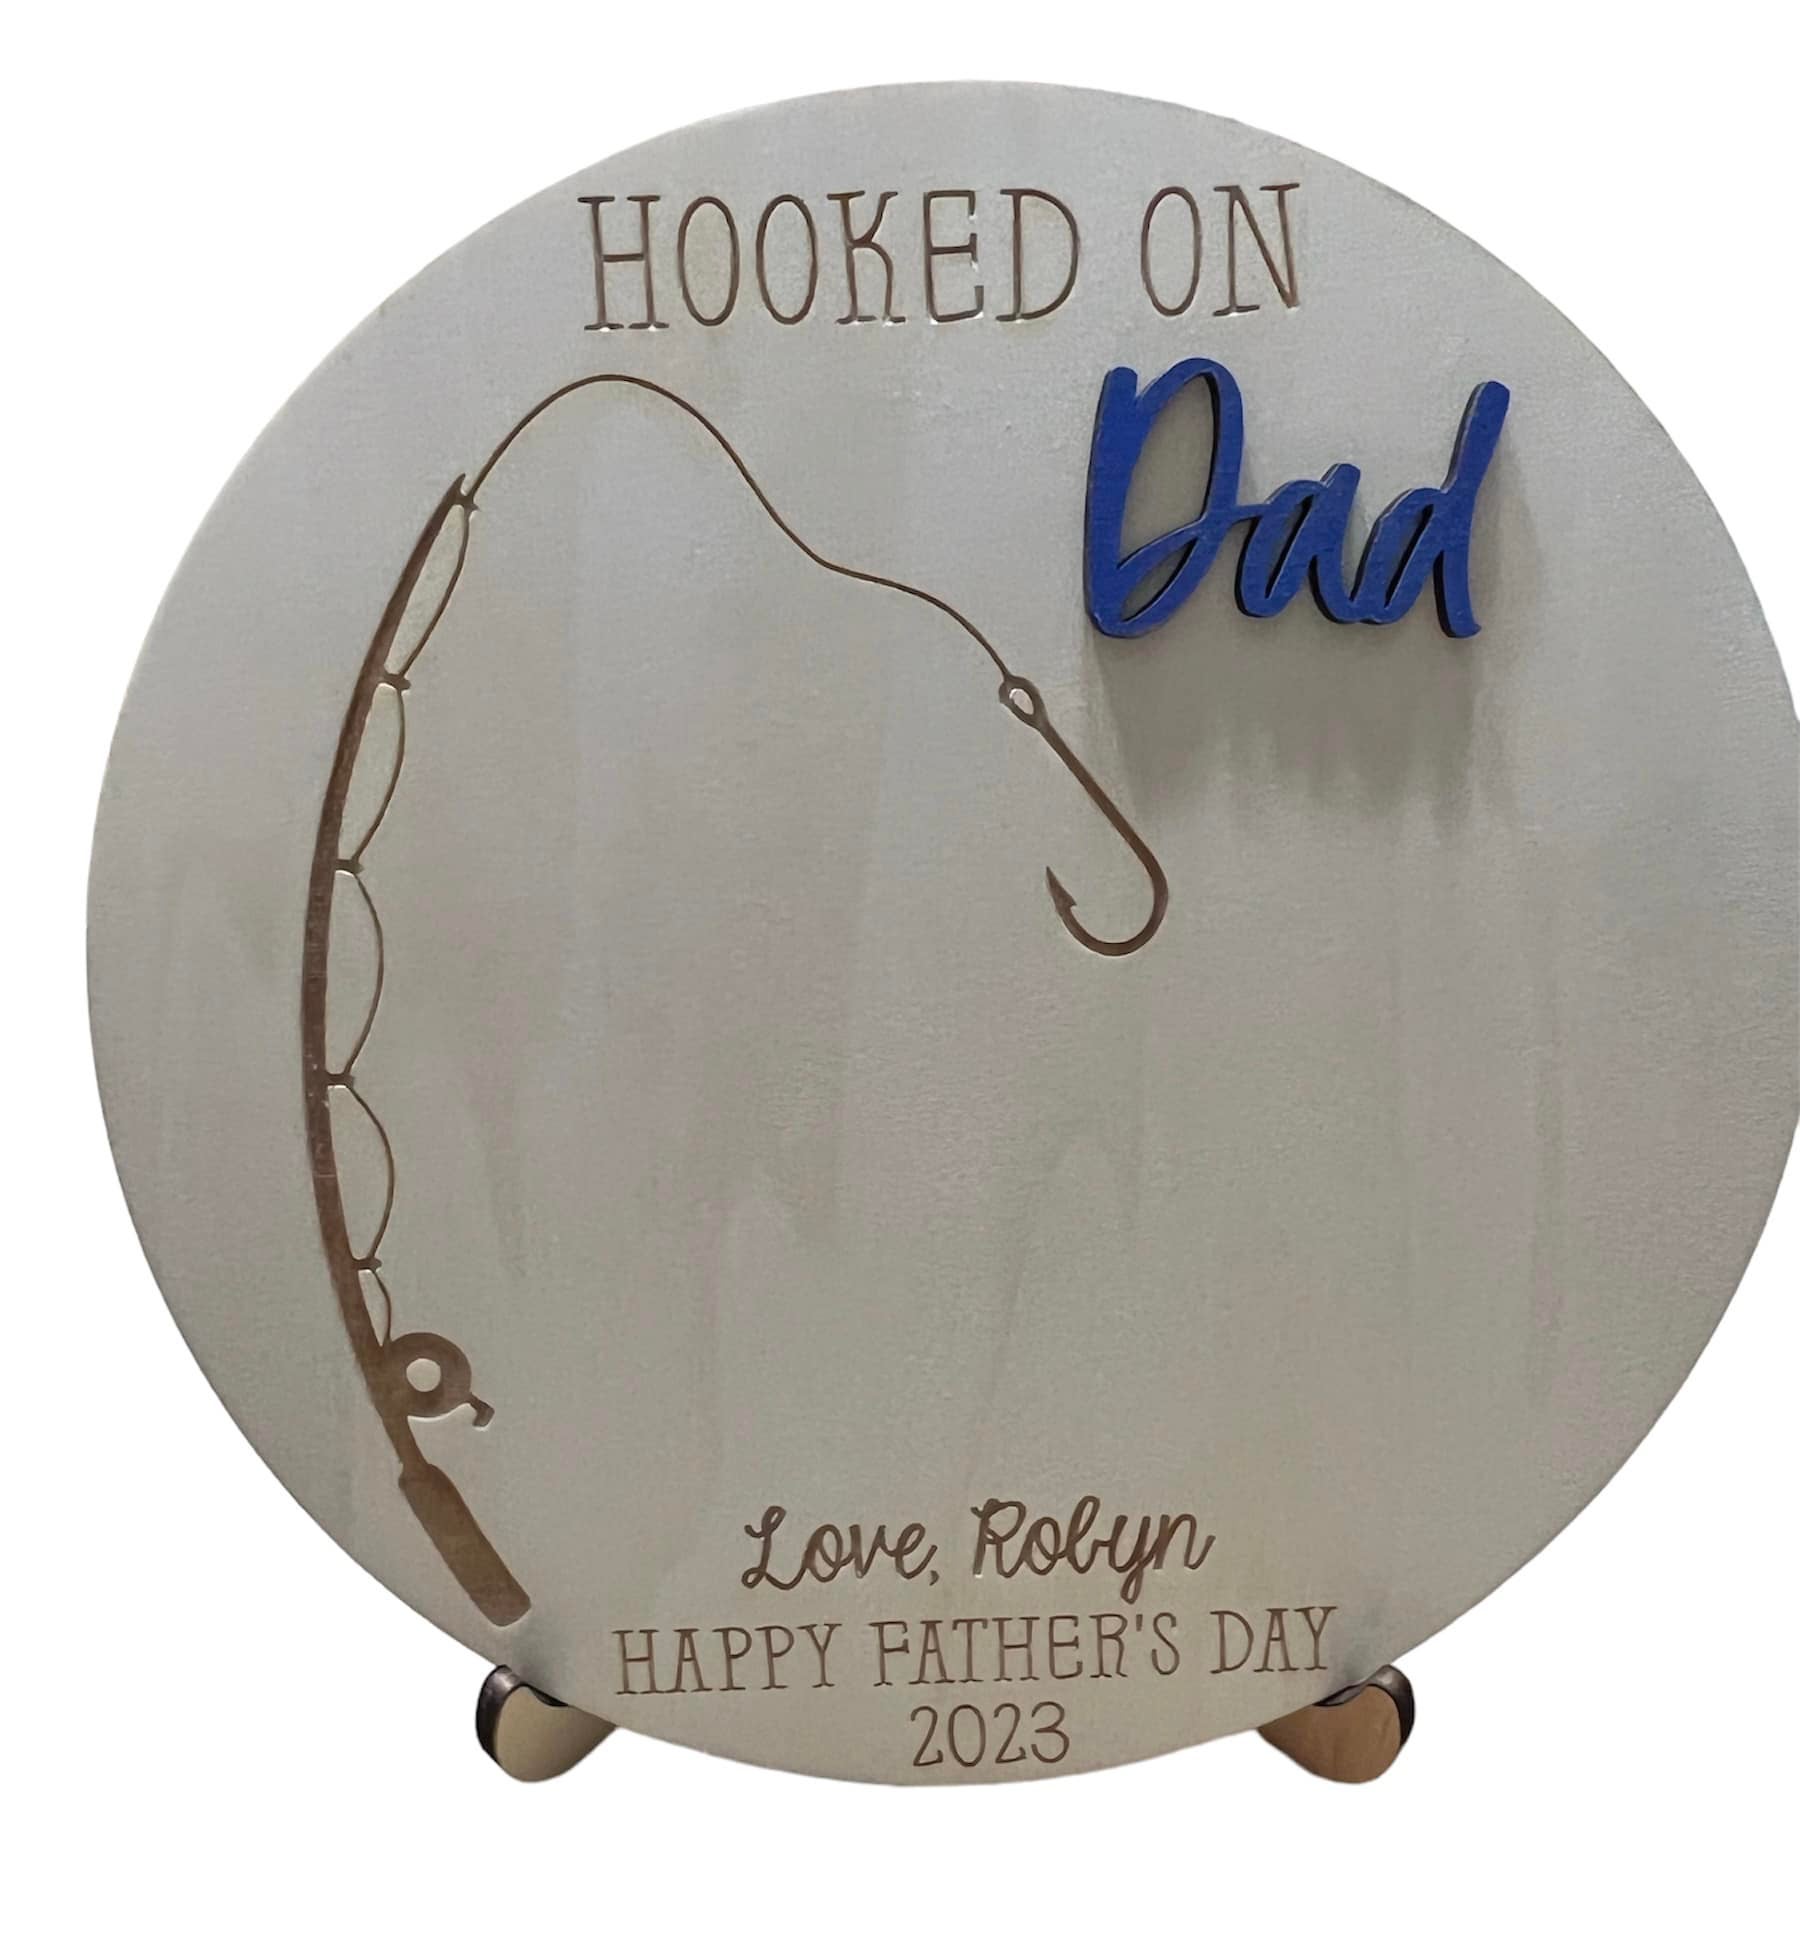 9 Inches & comes with stand. Hooked on dad handprint round. Can